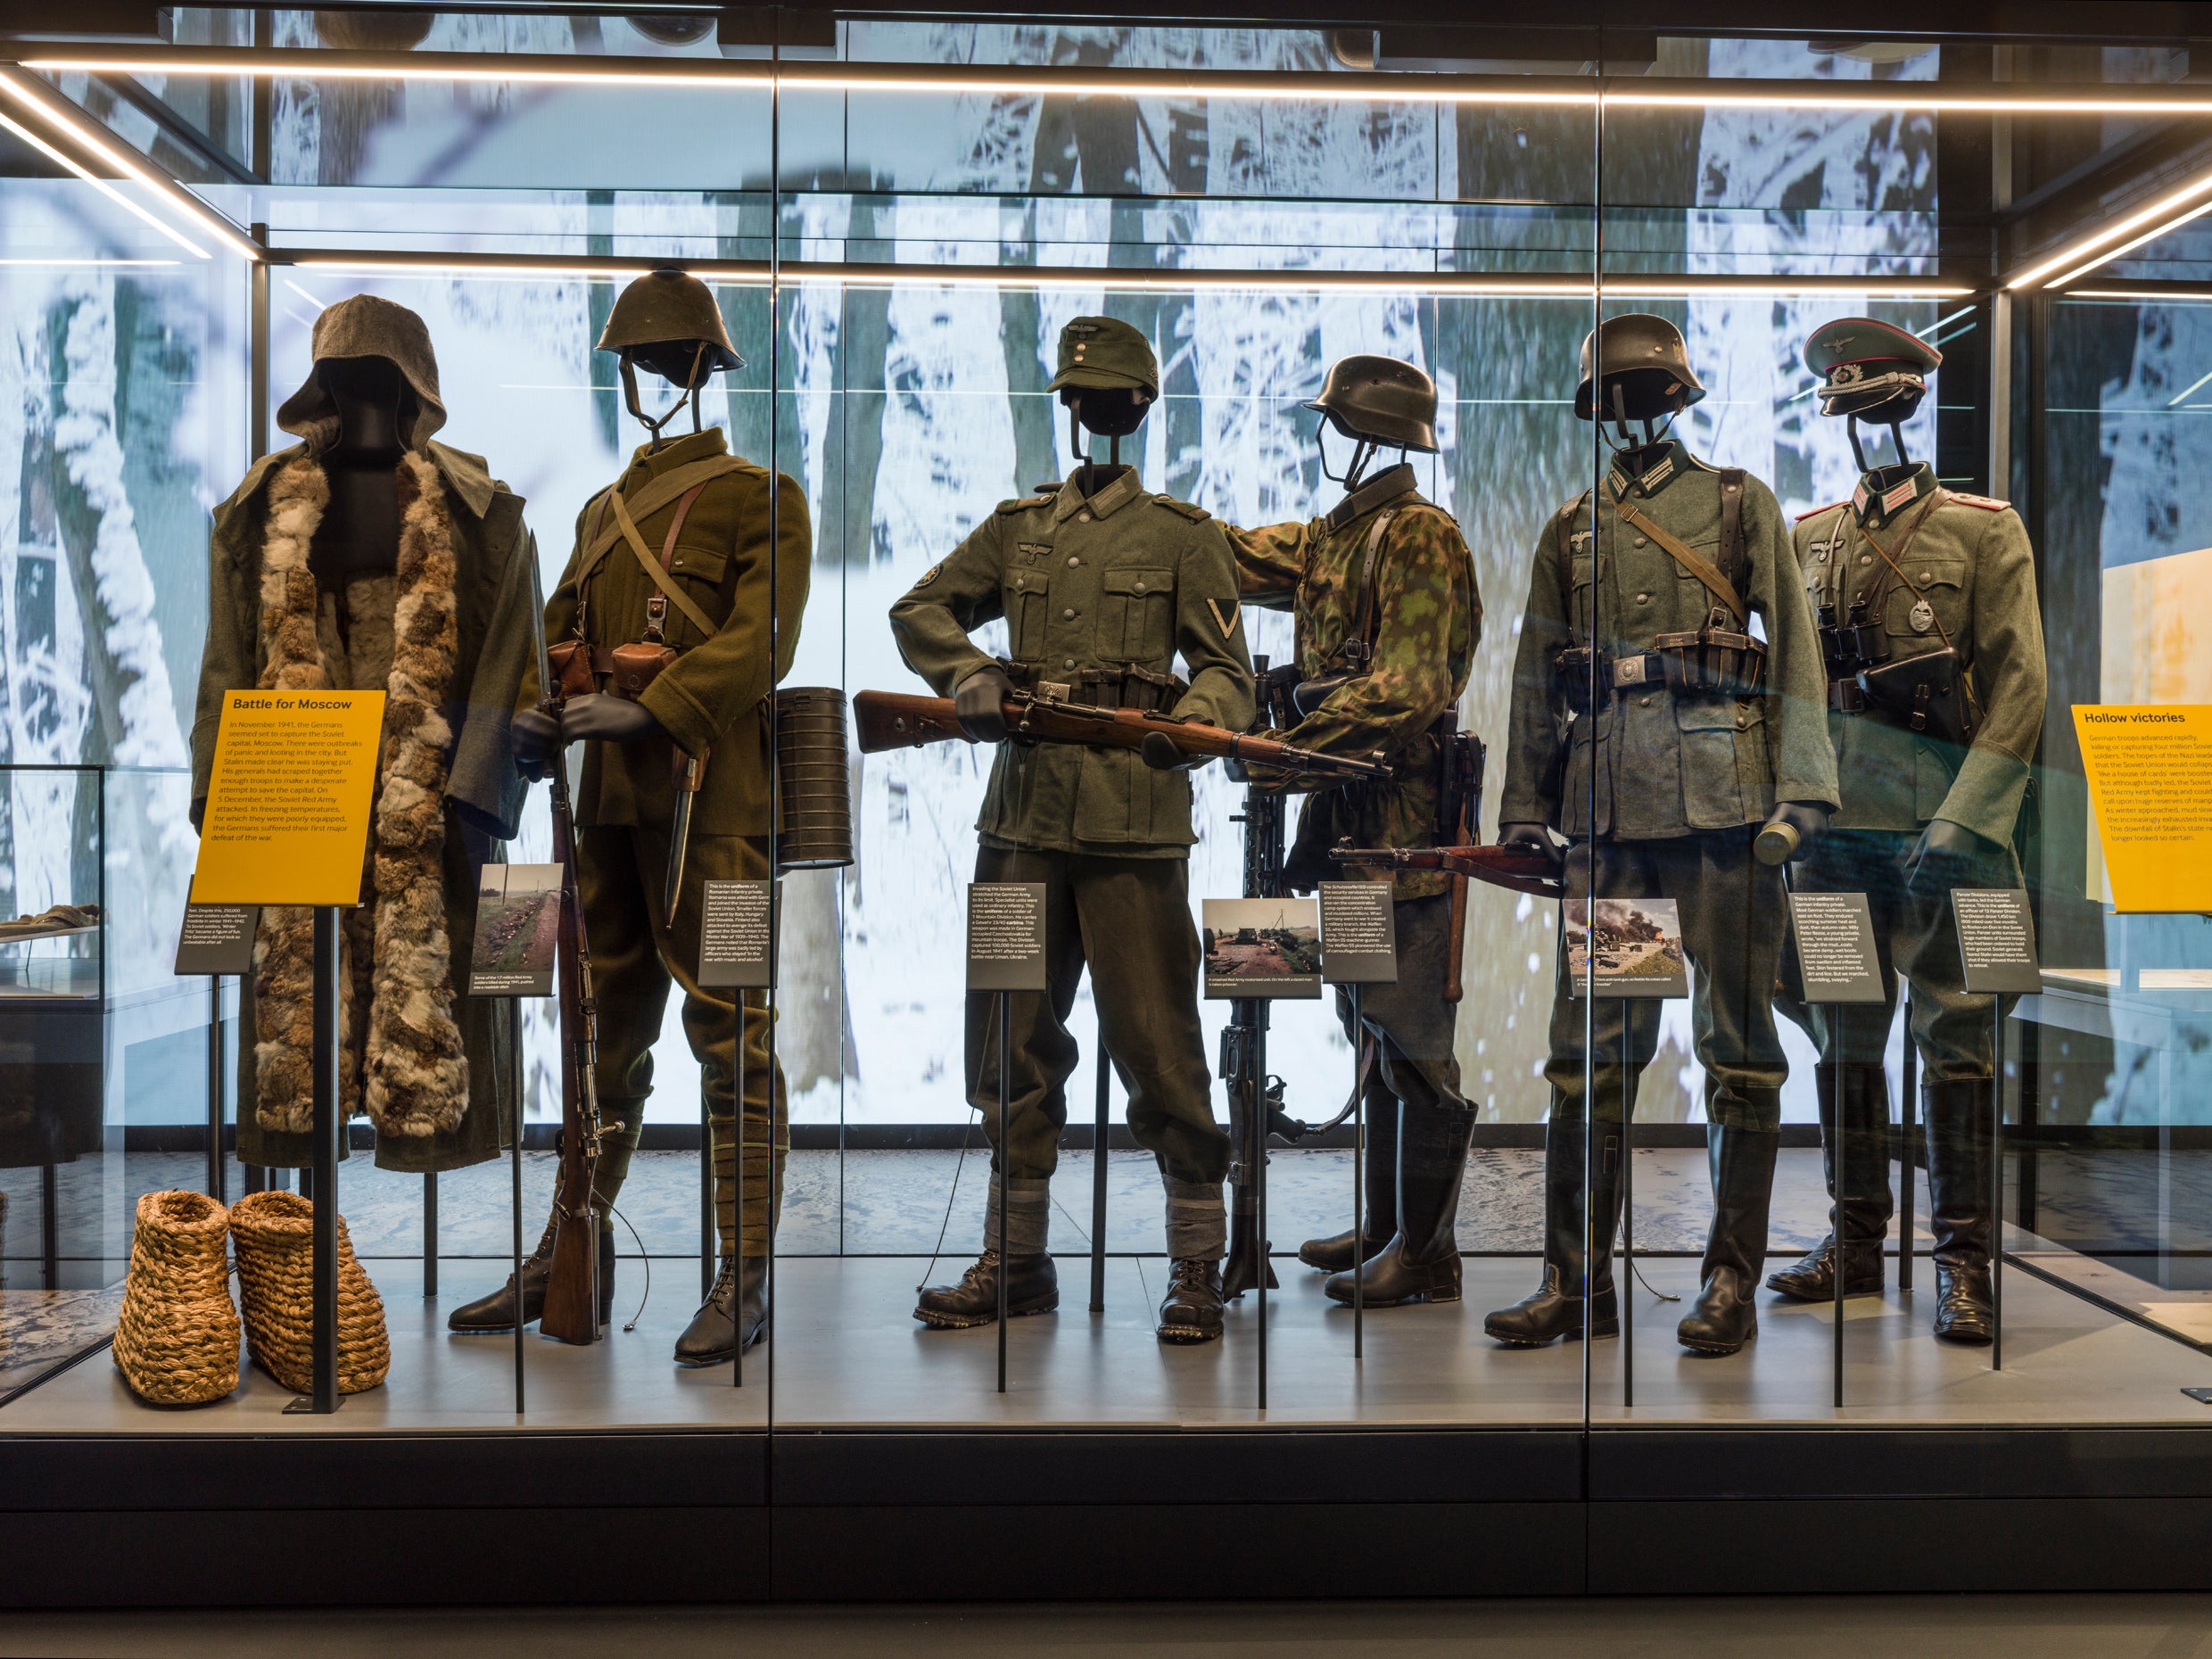 The Second World War gallery at the Imperial War Museum will open on 20 October.